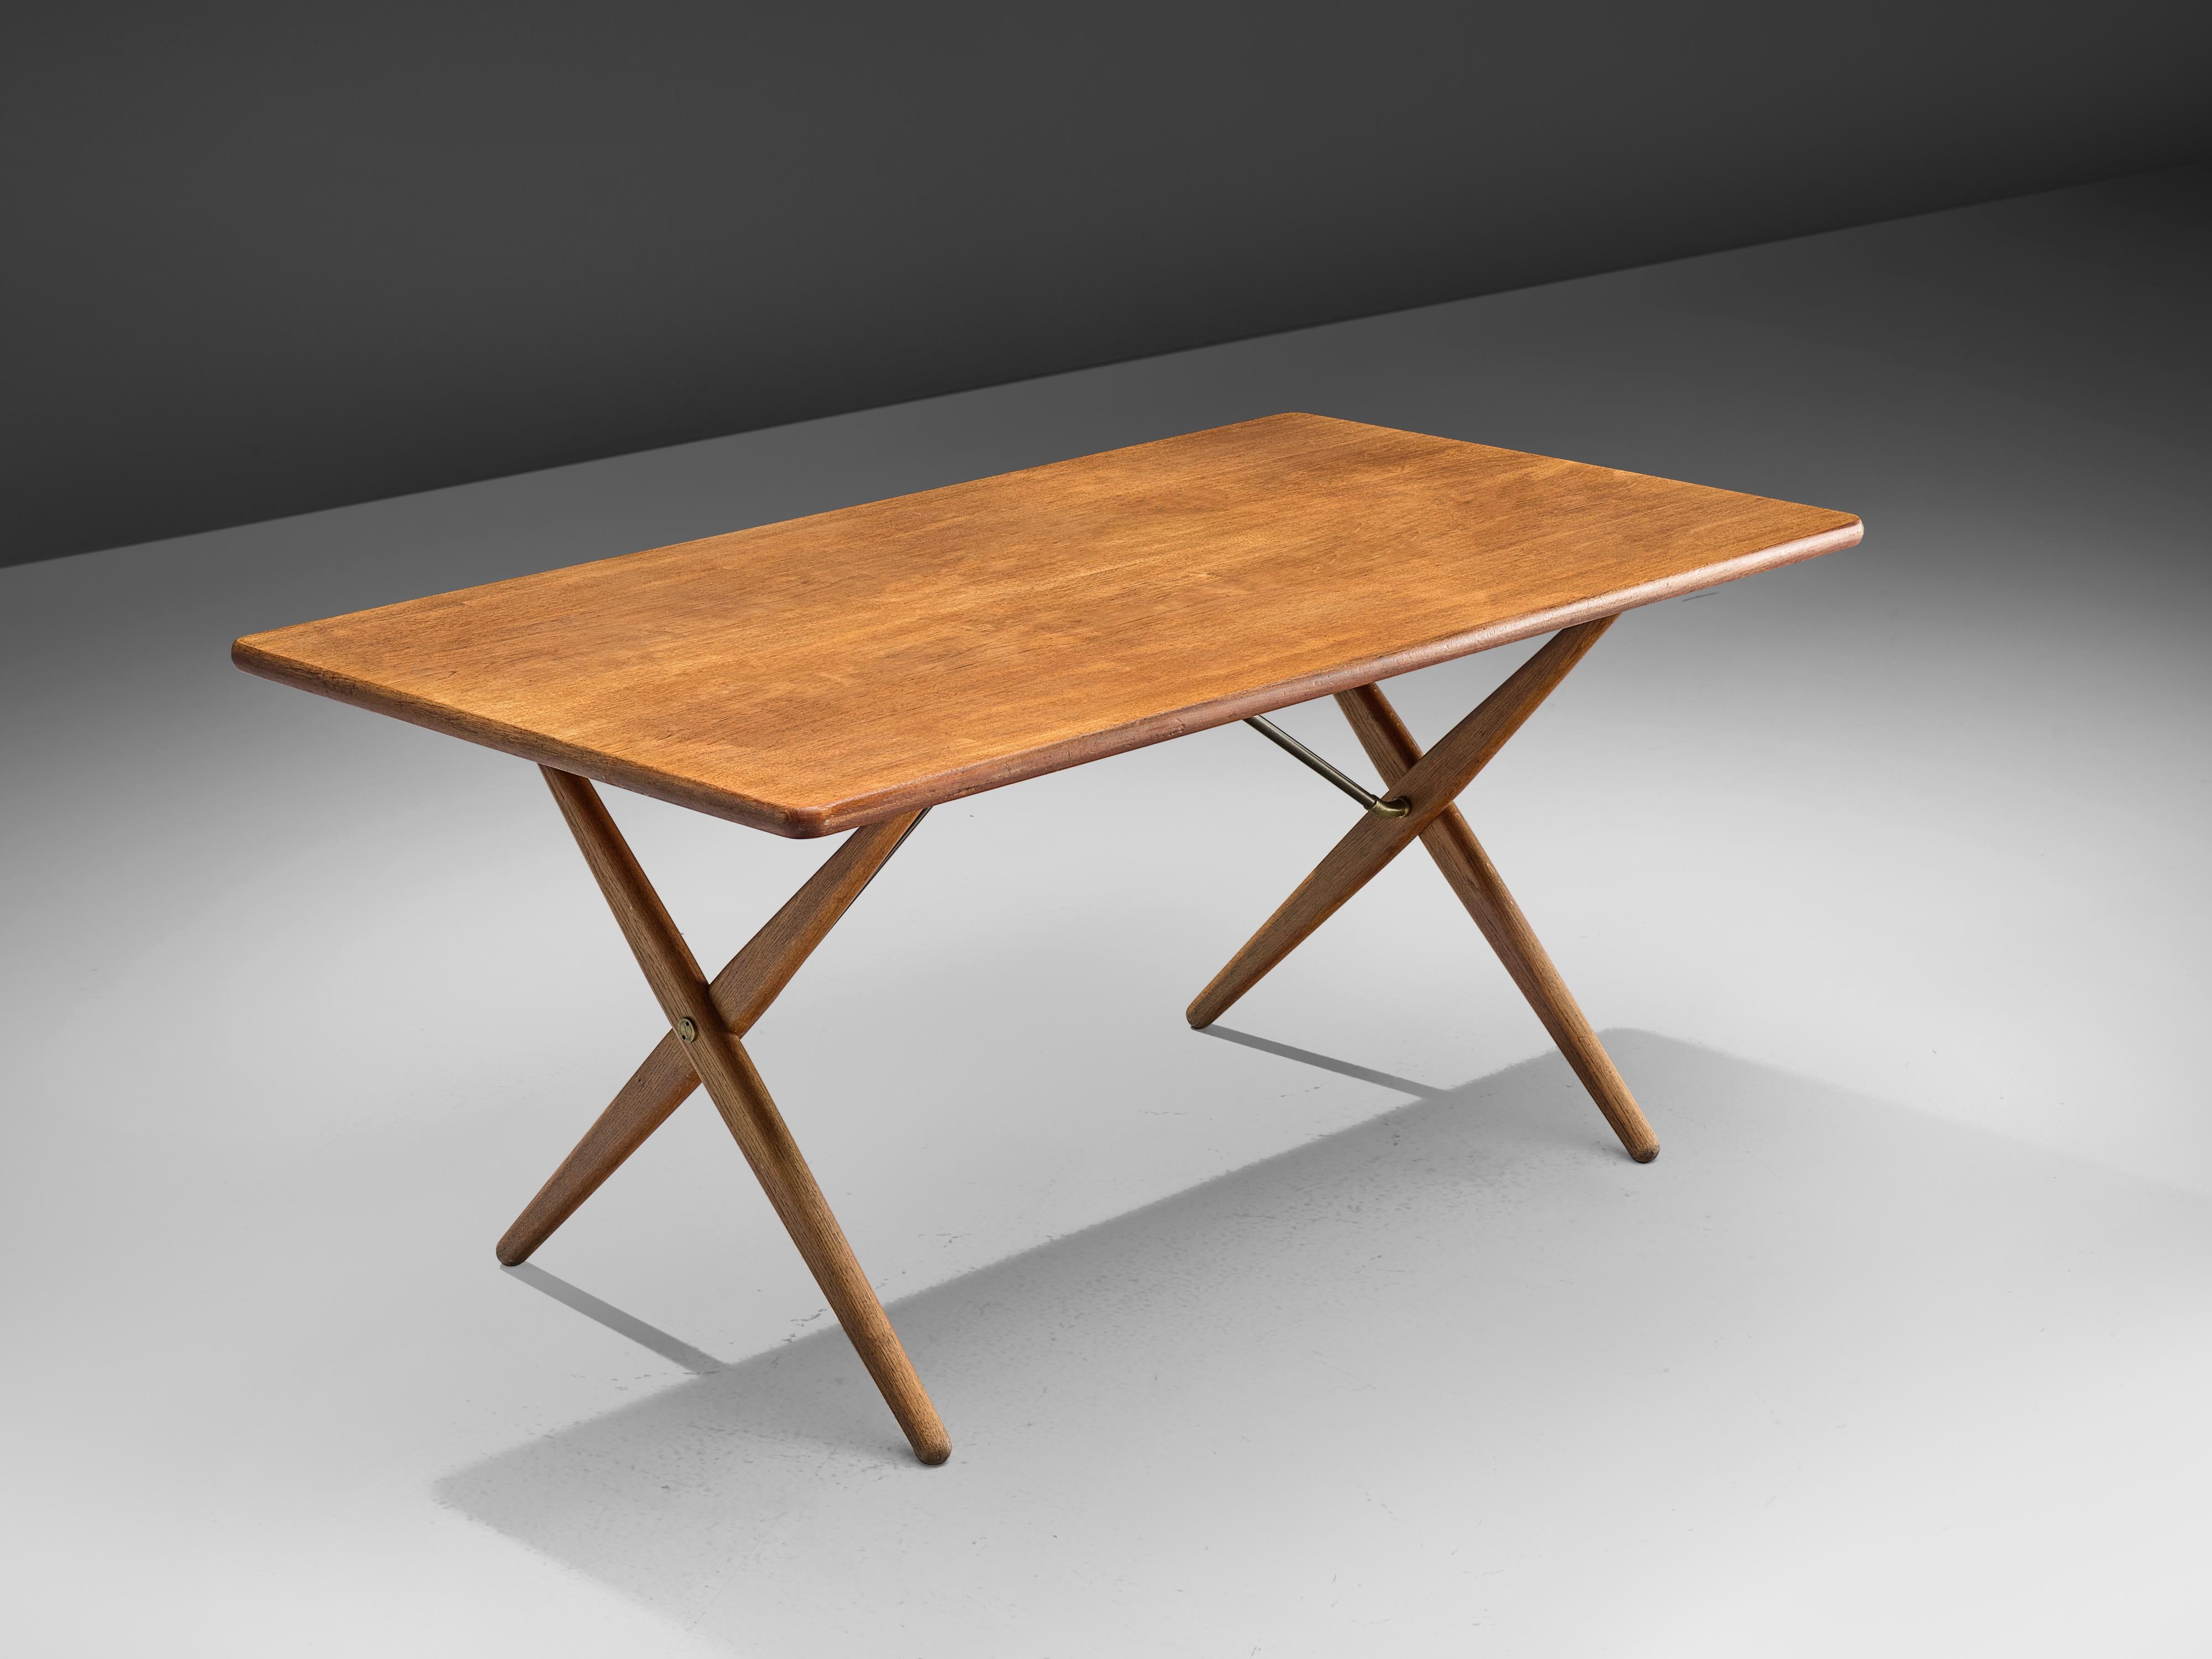 Hans J. Wegner for Andreas Tuck, table model AT-303, in teak, oak and metal, Denmark, 1955. 

Dining table with elegant X-shaped legs, by Danish Designer Hans Wegner. This table is a well-known design from Wegner. From a distance, this table, like